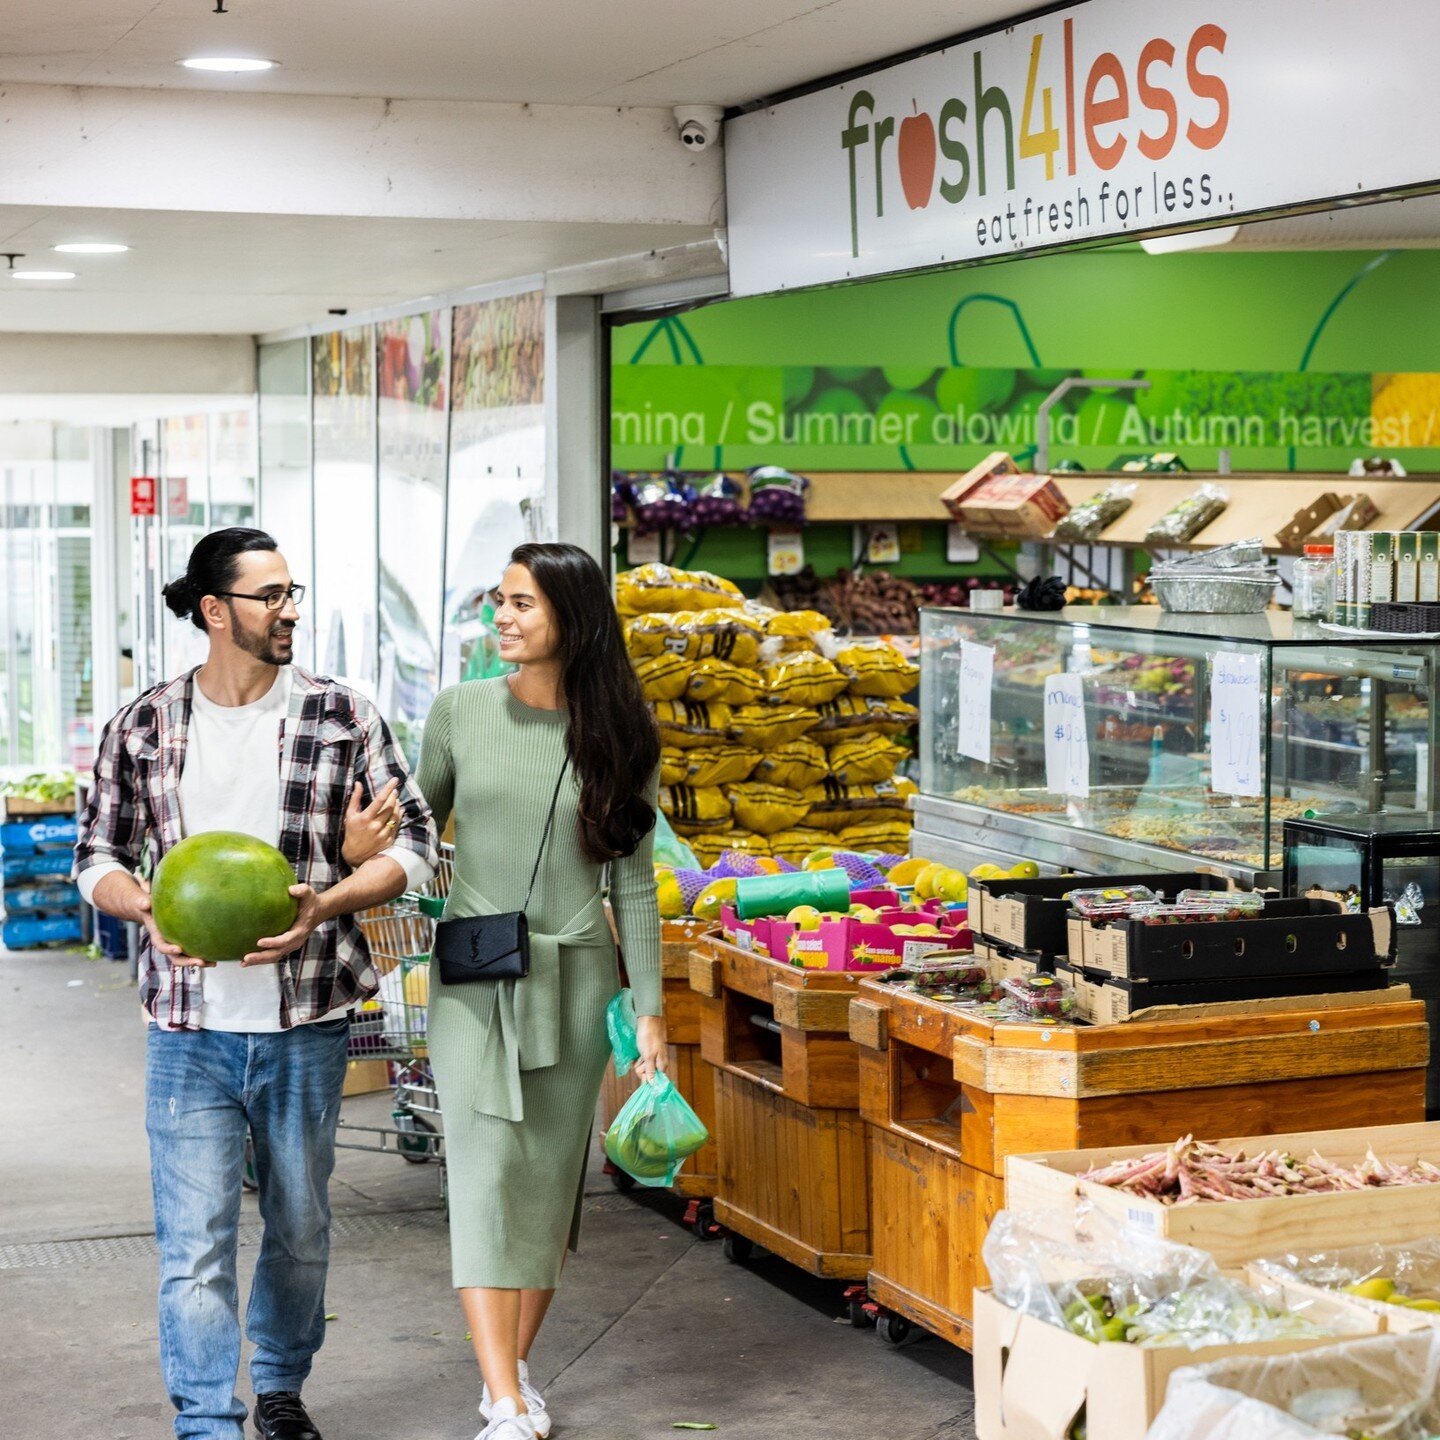 Save on your next grocery shop for fresh fruit and vegetables by visiting Fresh4less 🥕🍉🥦

With great prices and high quality produce the whole family will love, what more could you ask for 🍏 🌽